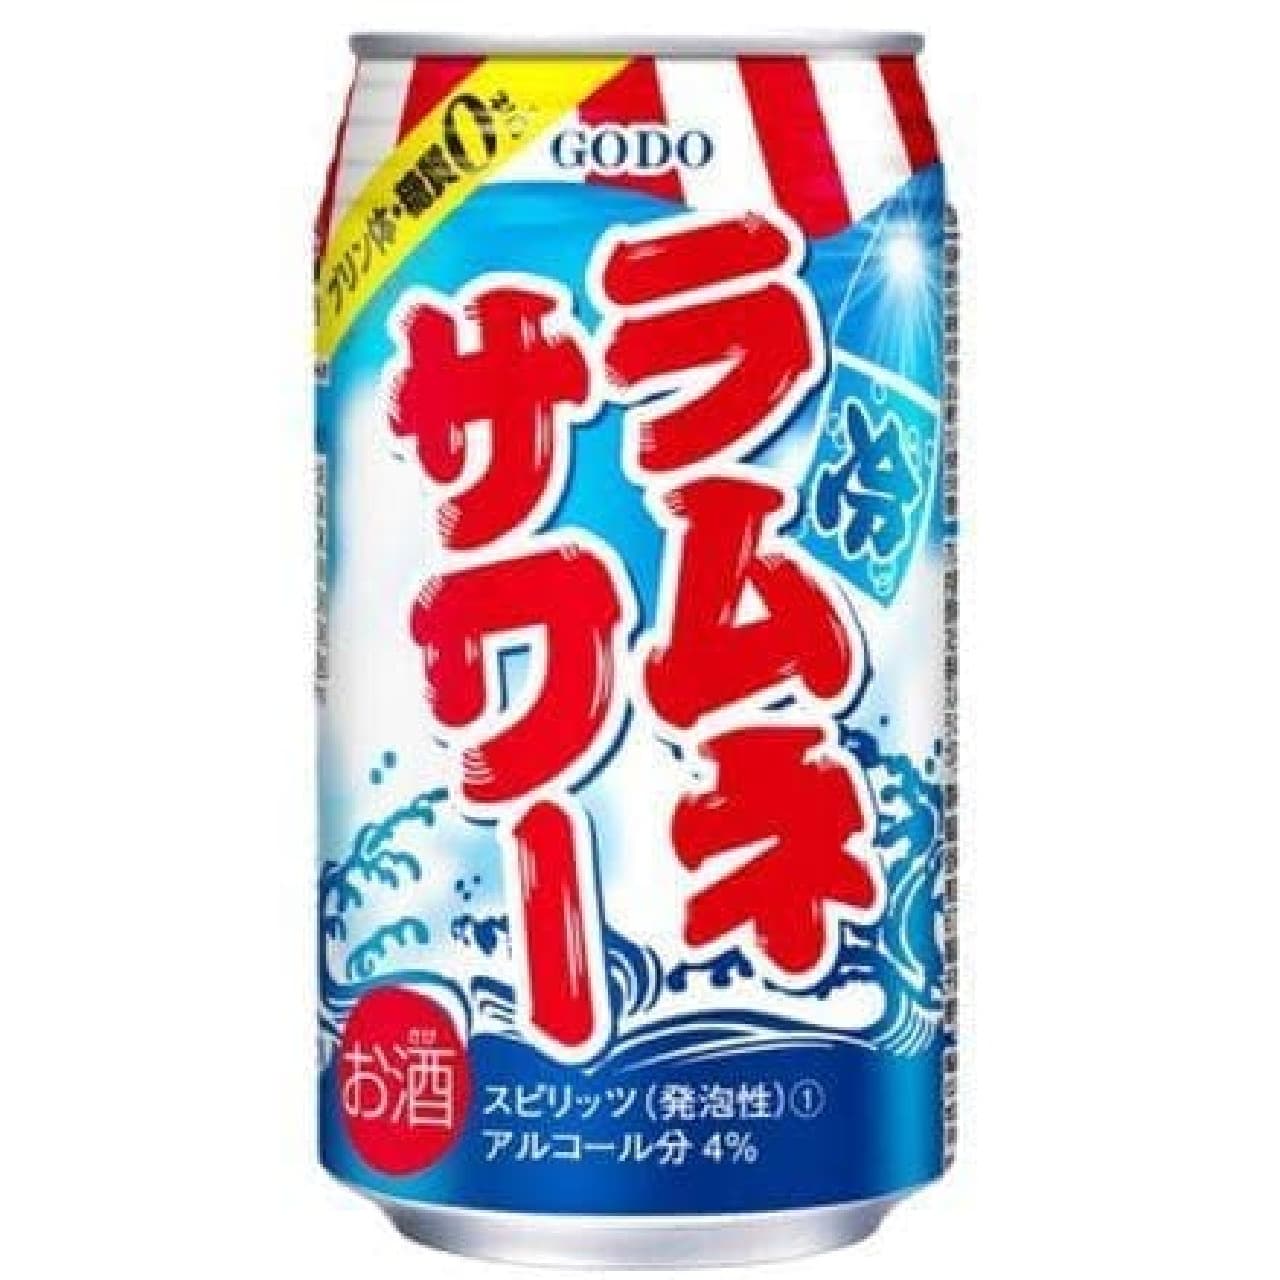 A refreshing ramune sour